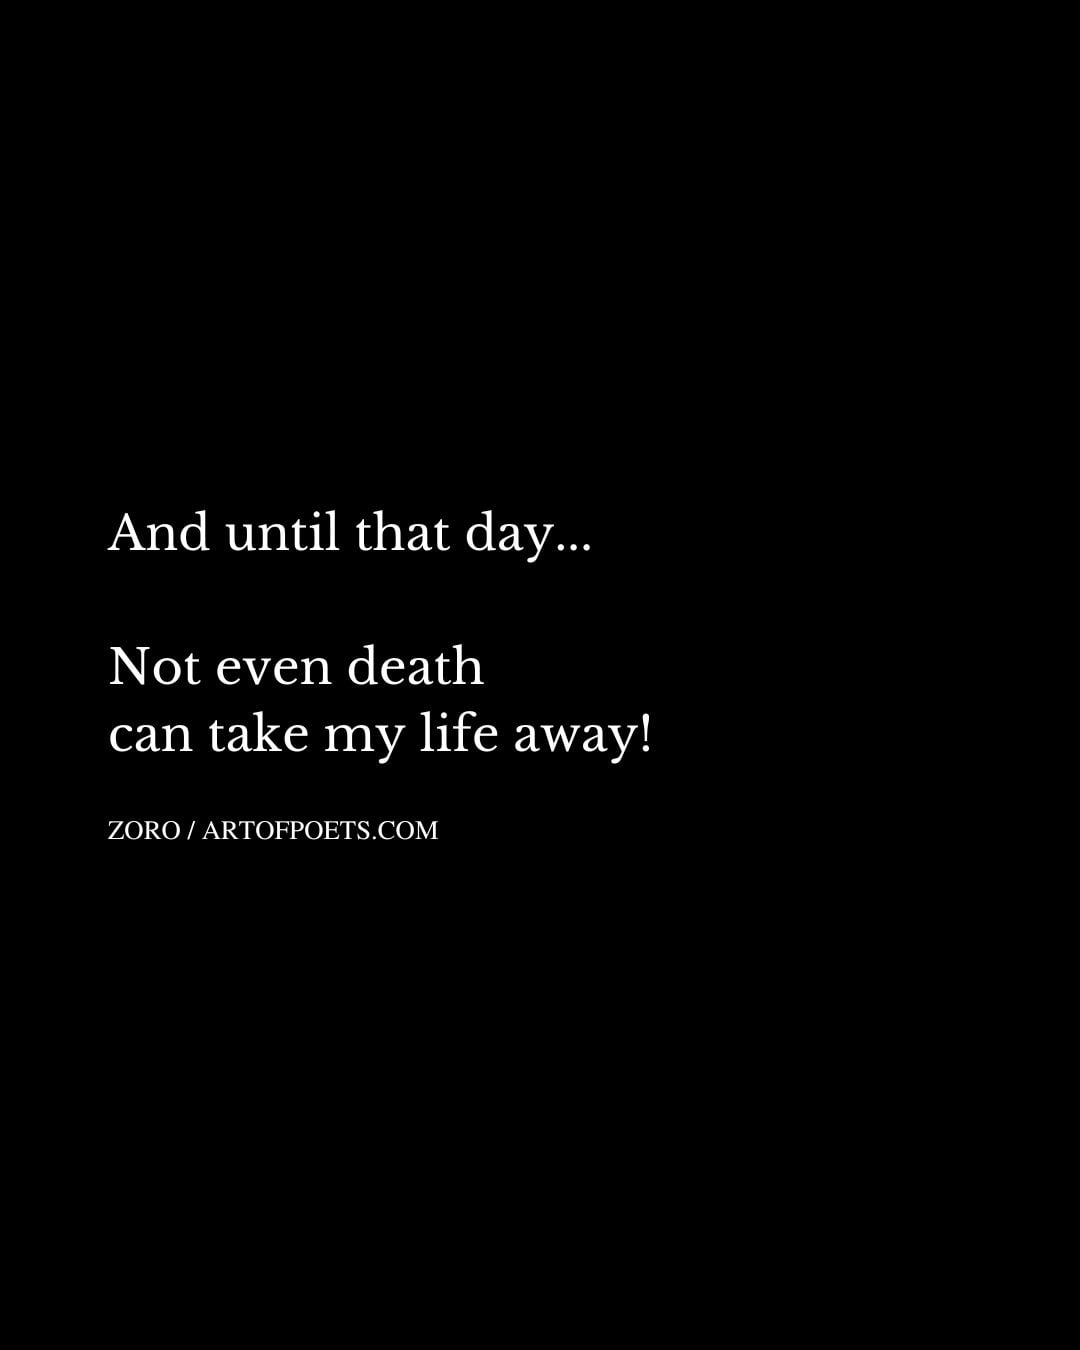 And until that day. Not even death can take my life away